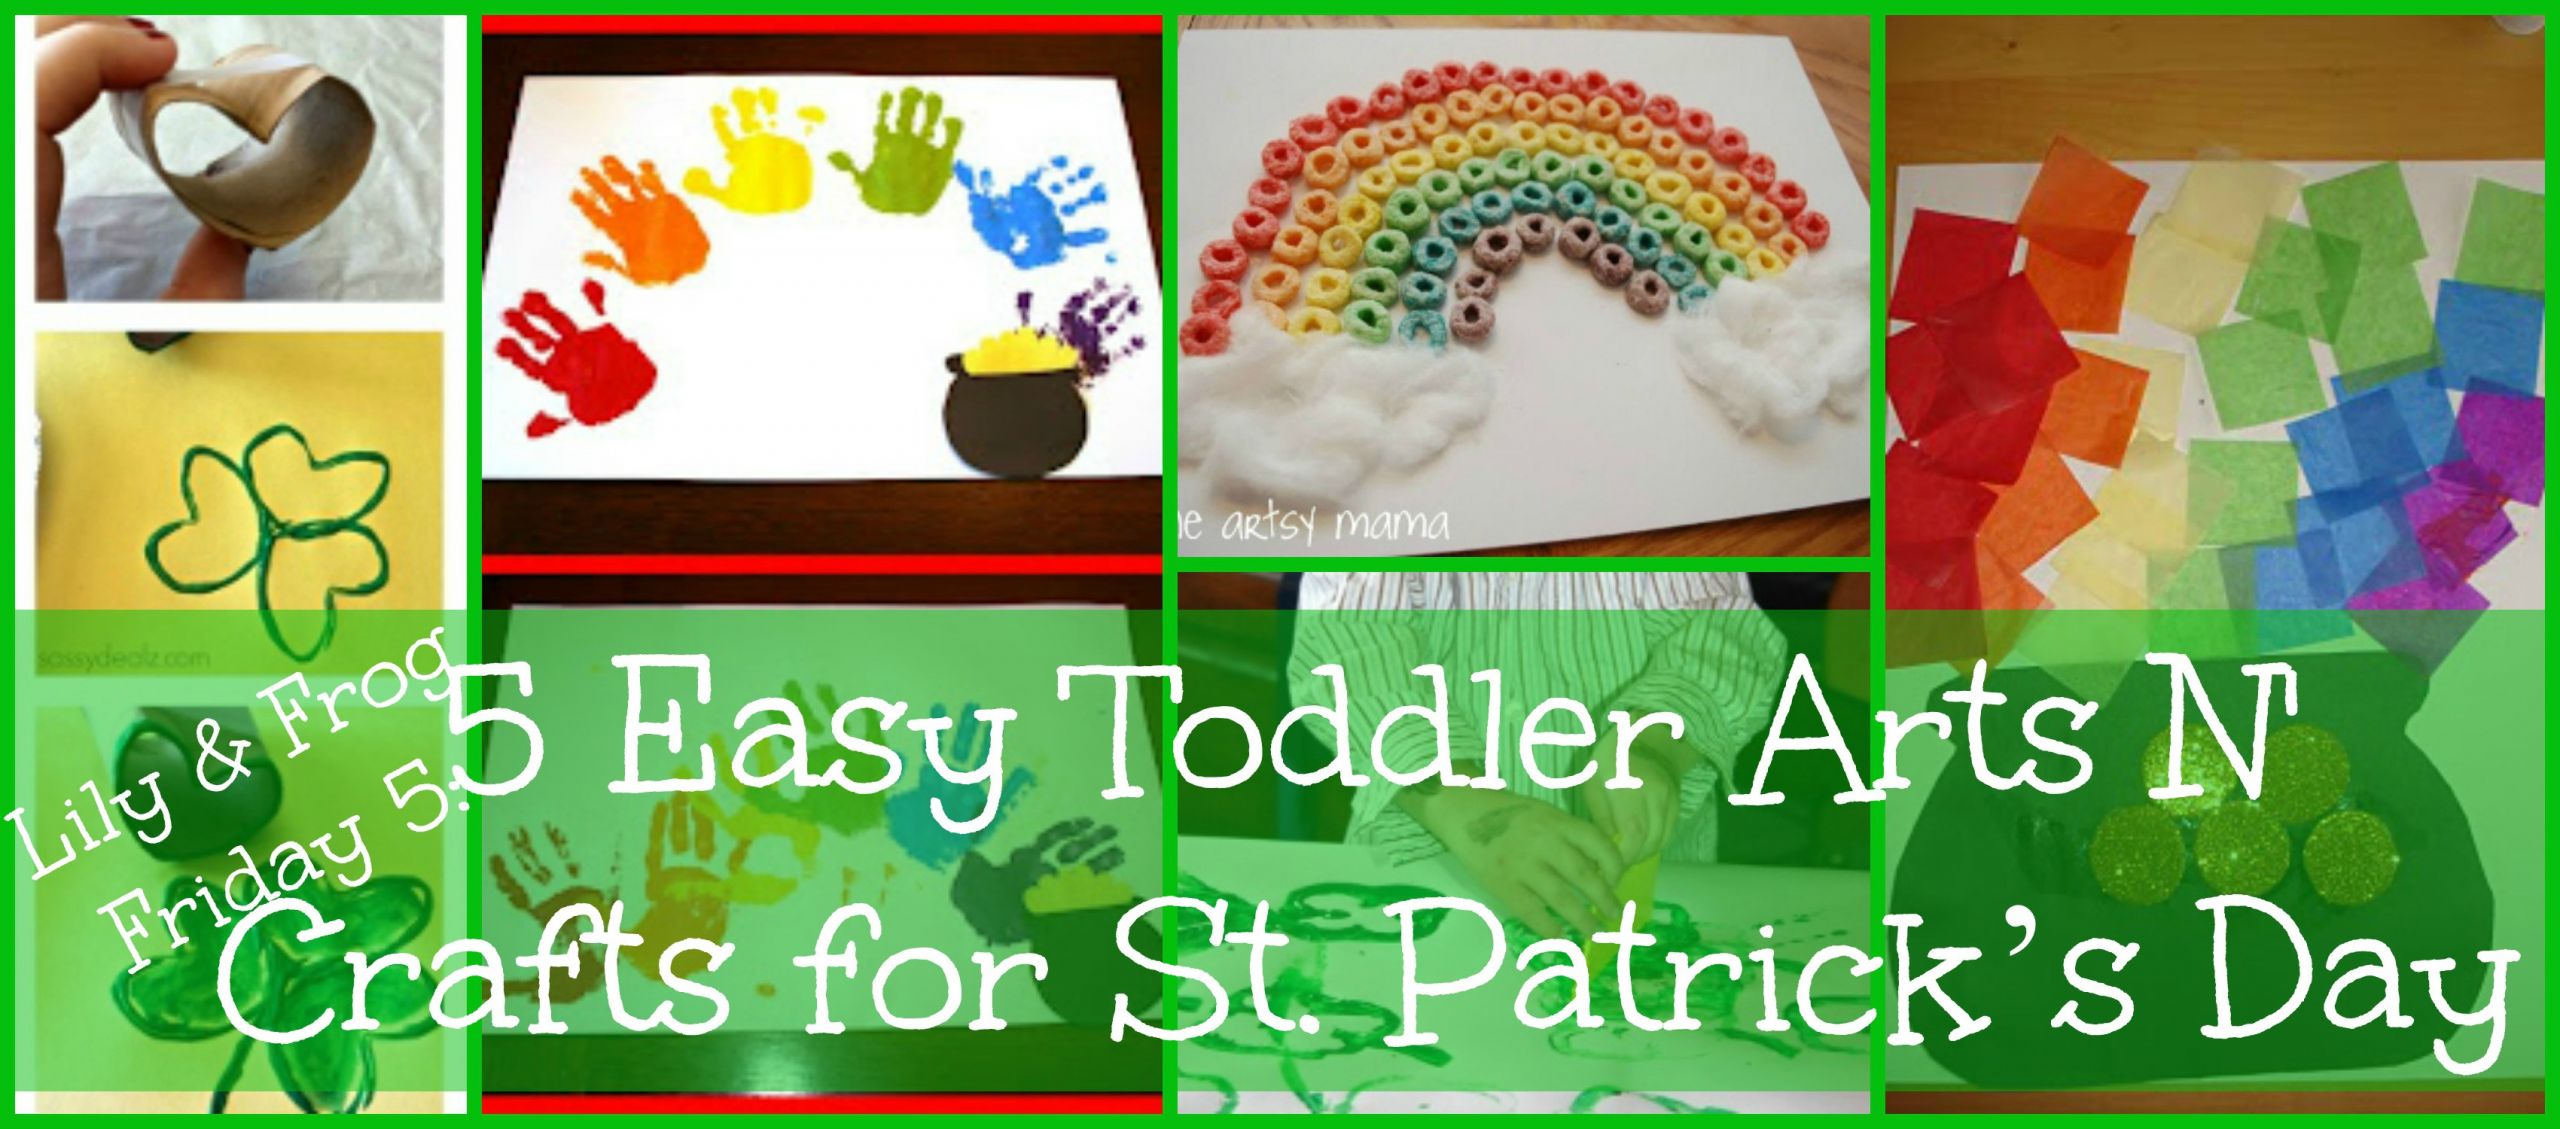 Arts N Crafts For Toddlers
 Lily & Frog Friday 5 5 Easy Toddler Arts N’ Crafts for St